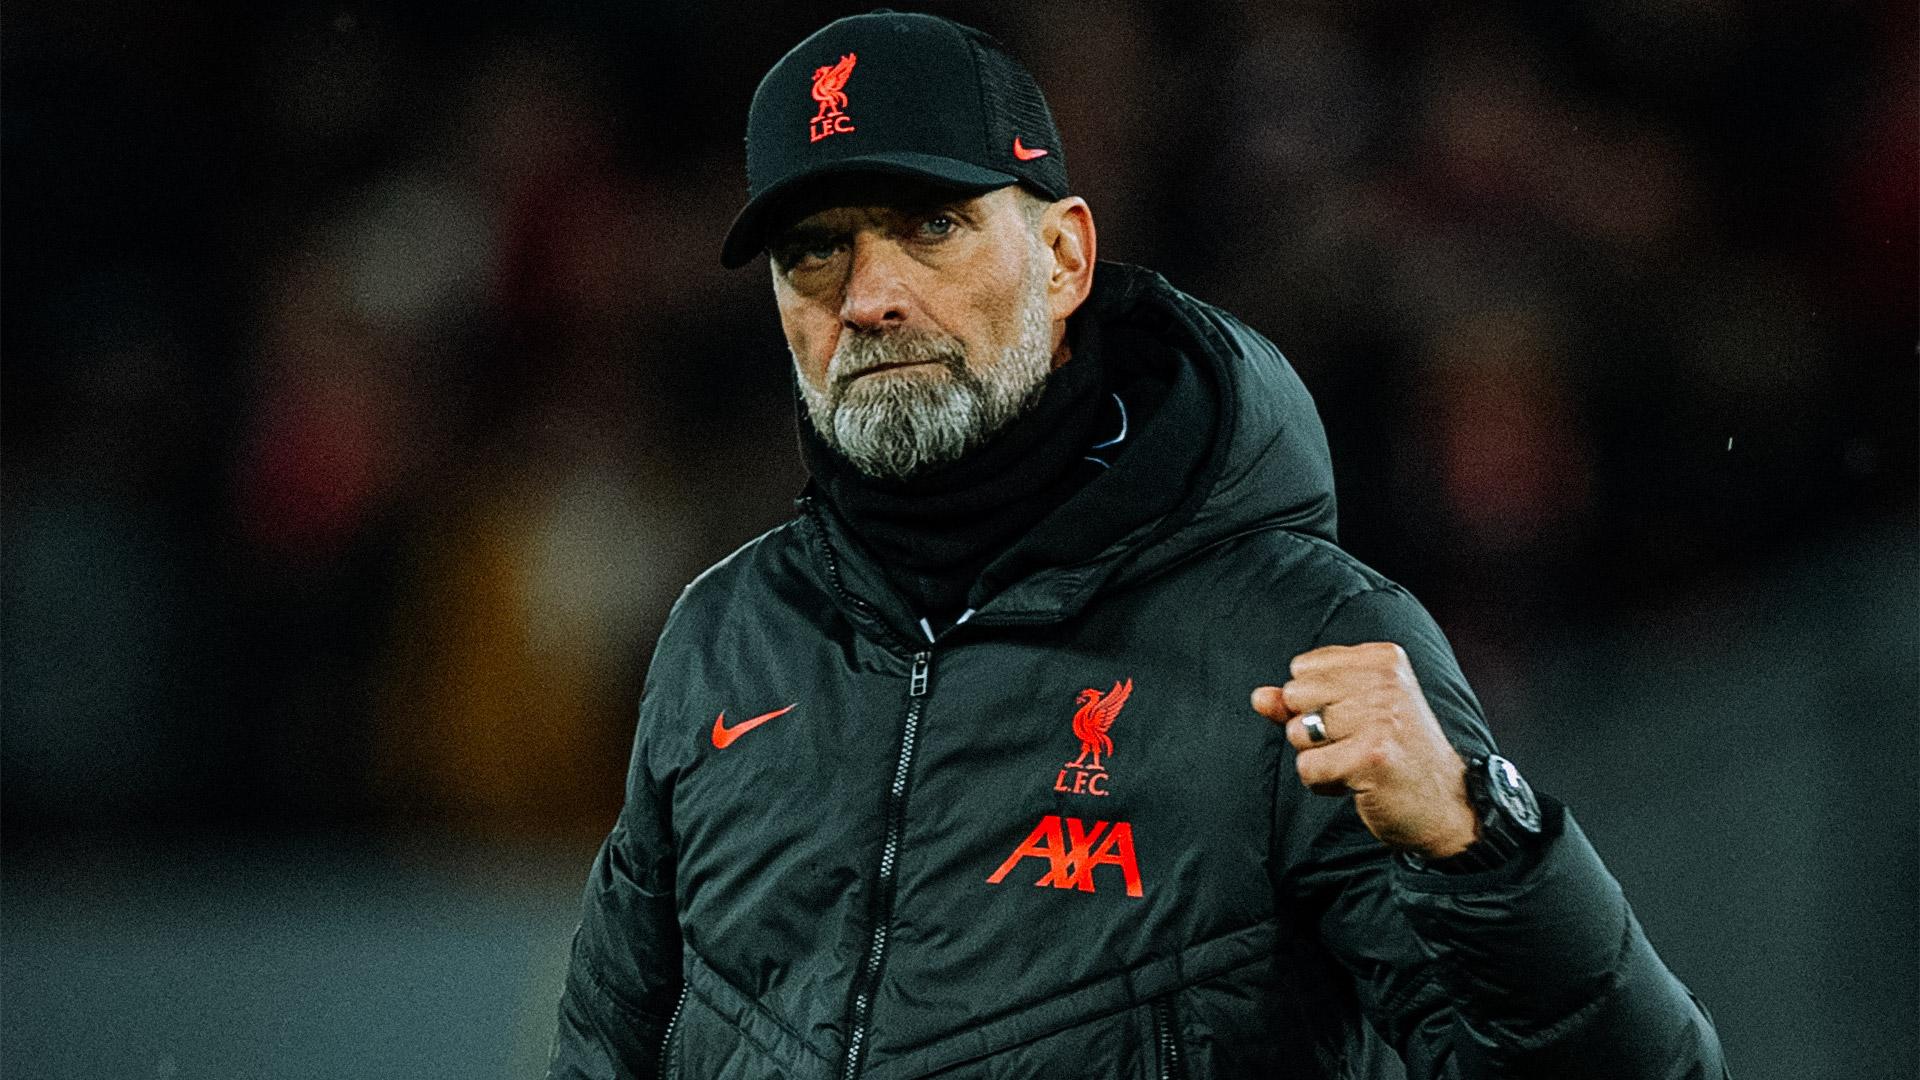 Liverpool FC — Jürgen Klopp: An important week is about to draw to a close  - let's end it on a high